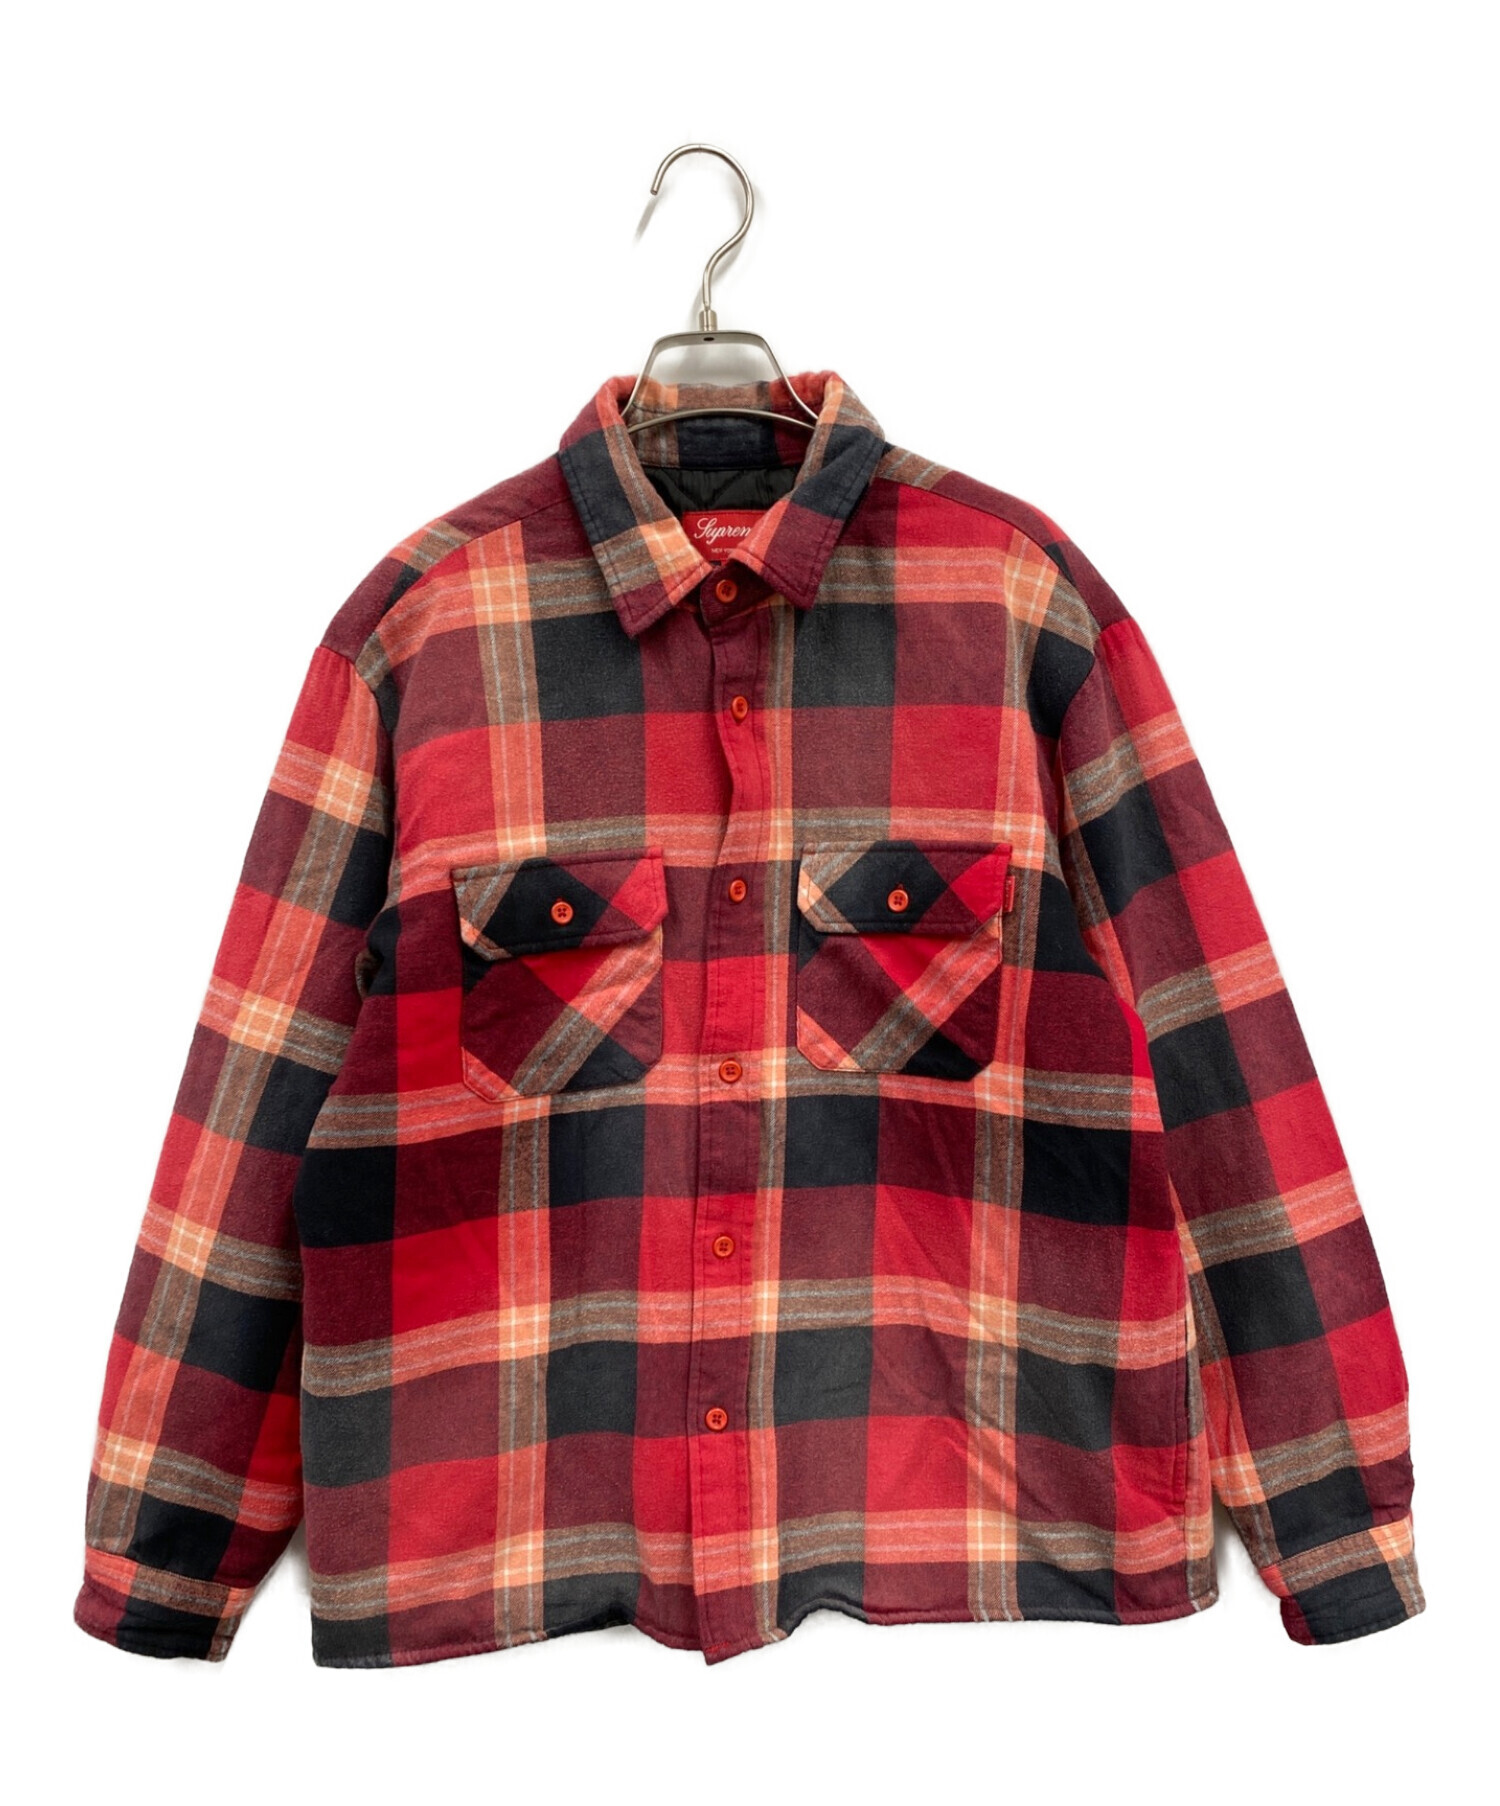 SUPREME 20AW Quilted Flannel Shirt ジャケット